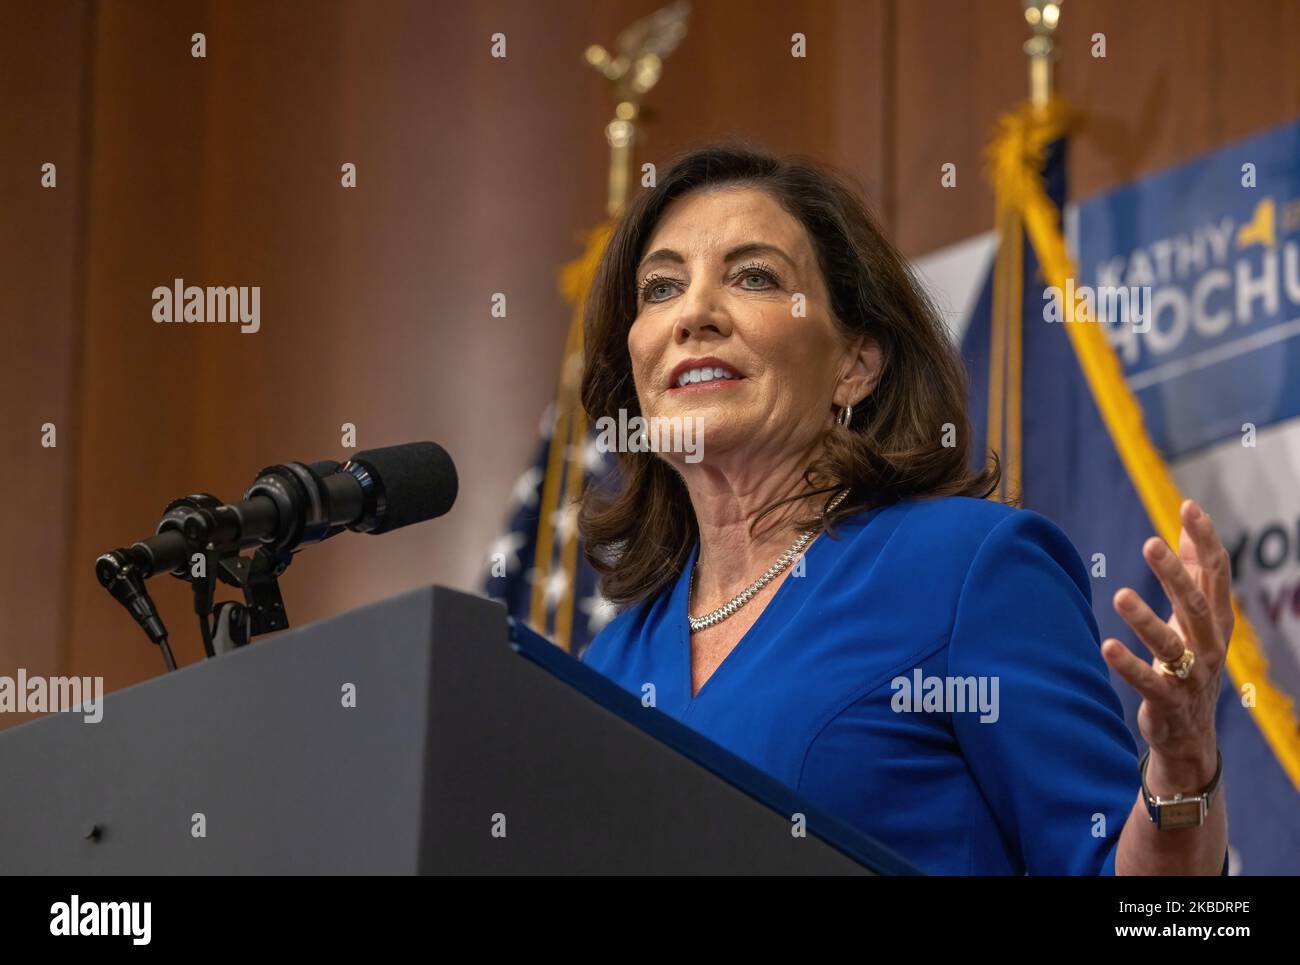 NEW YORK, N.Y. – November 3, 2022: New York Governor Kathy Hochul addresses a campaign rally at Barnard College in New York City. Stock Photo